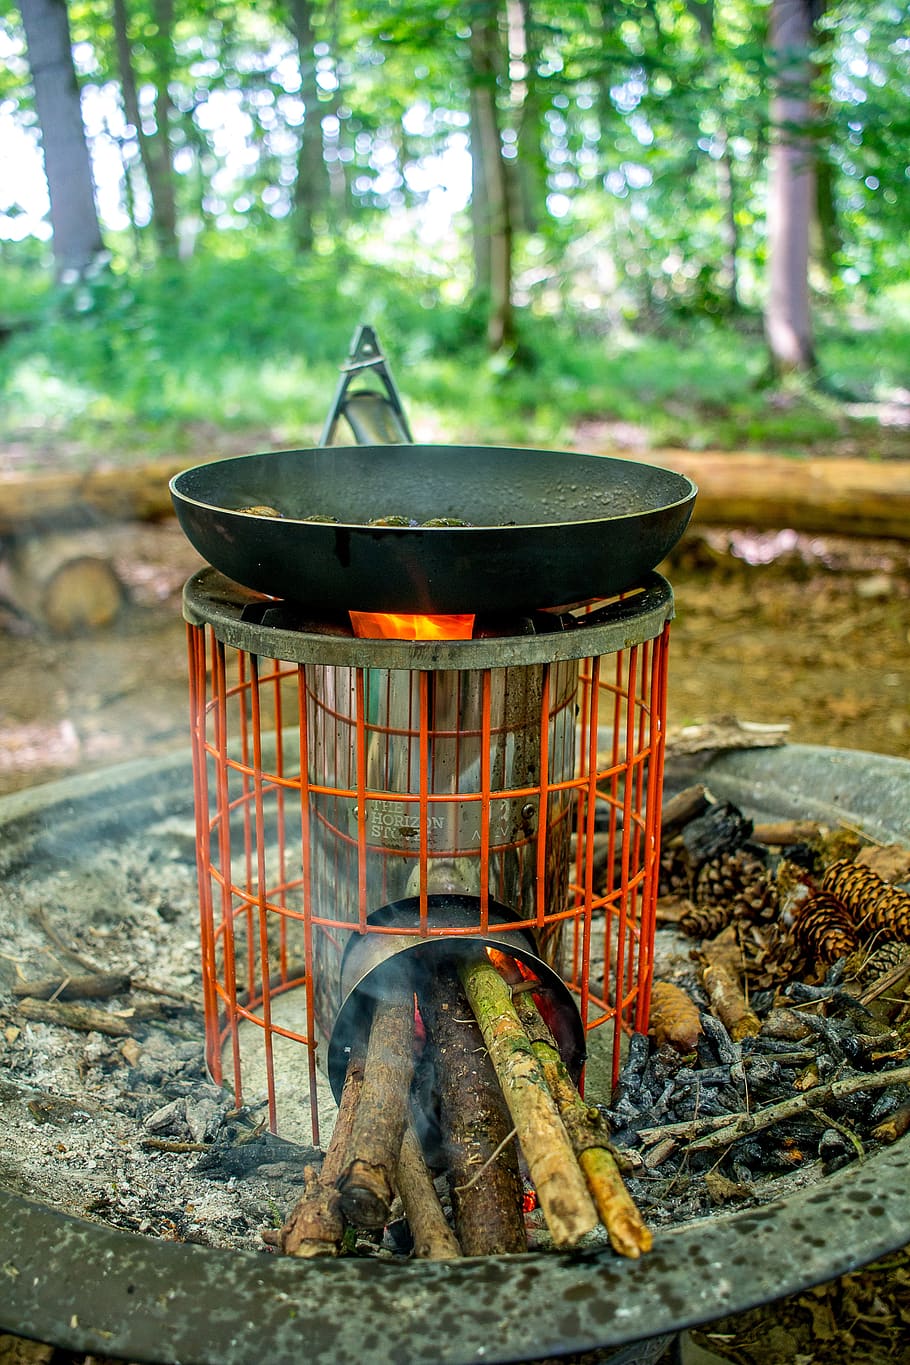 camping, fire, campfire, pan, sausage, stove, heat - temperature, burning, focus on foreground, day